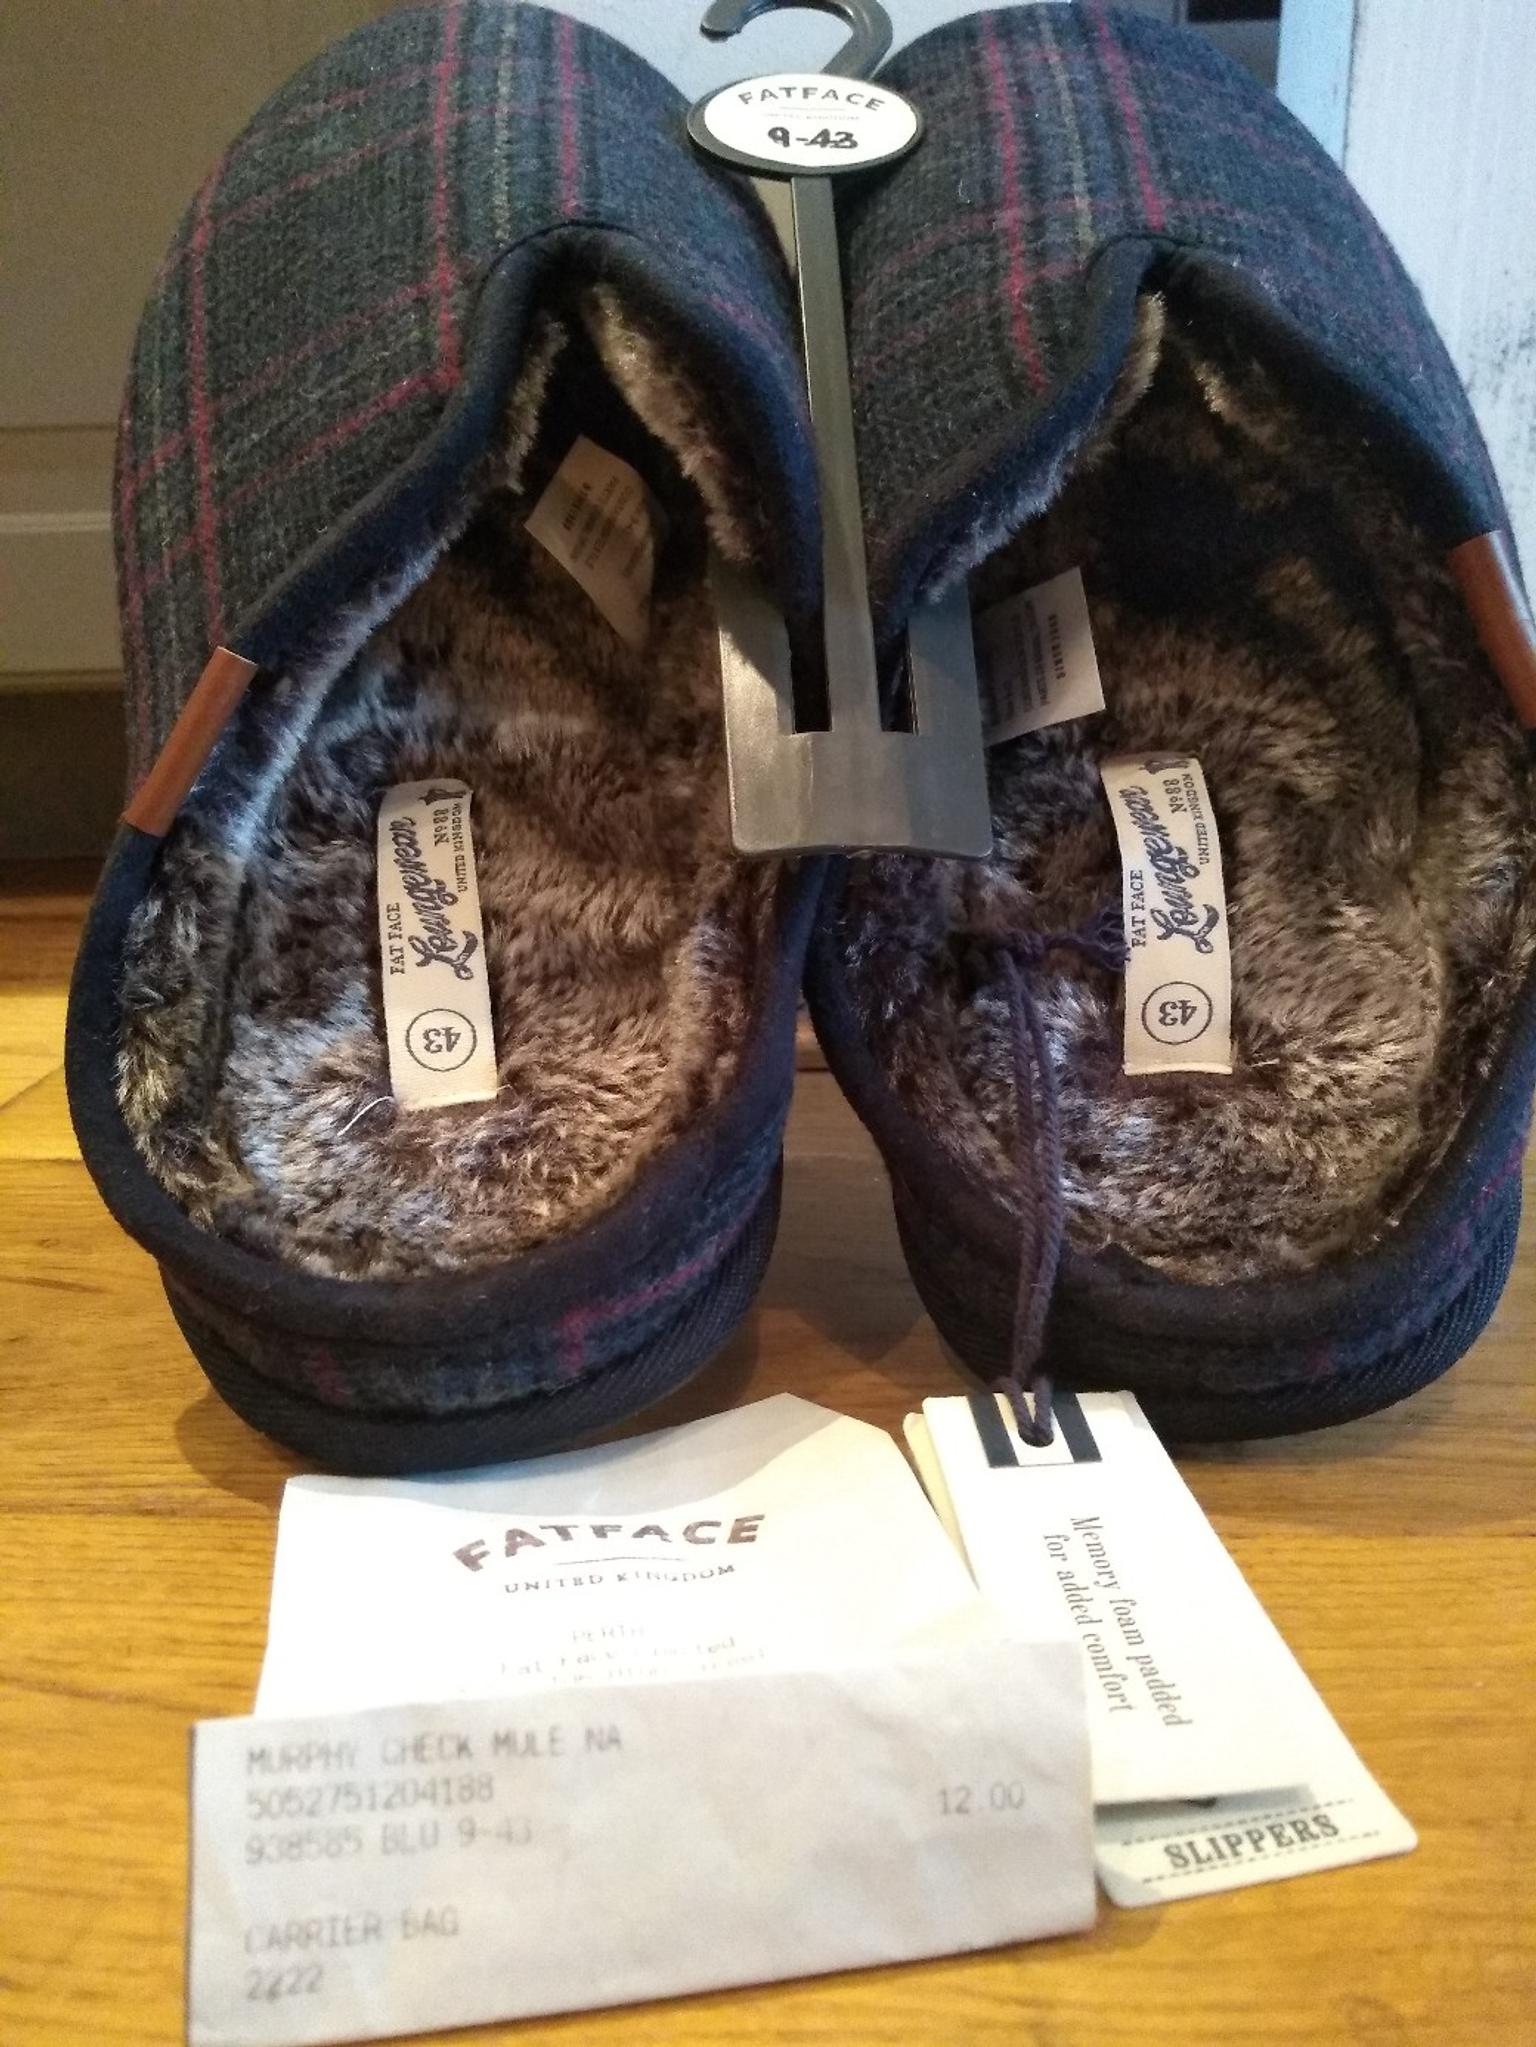 fatface mens slippers